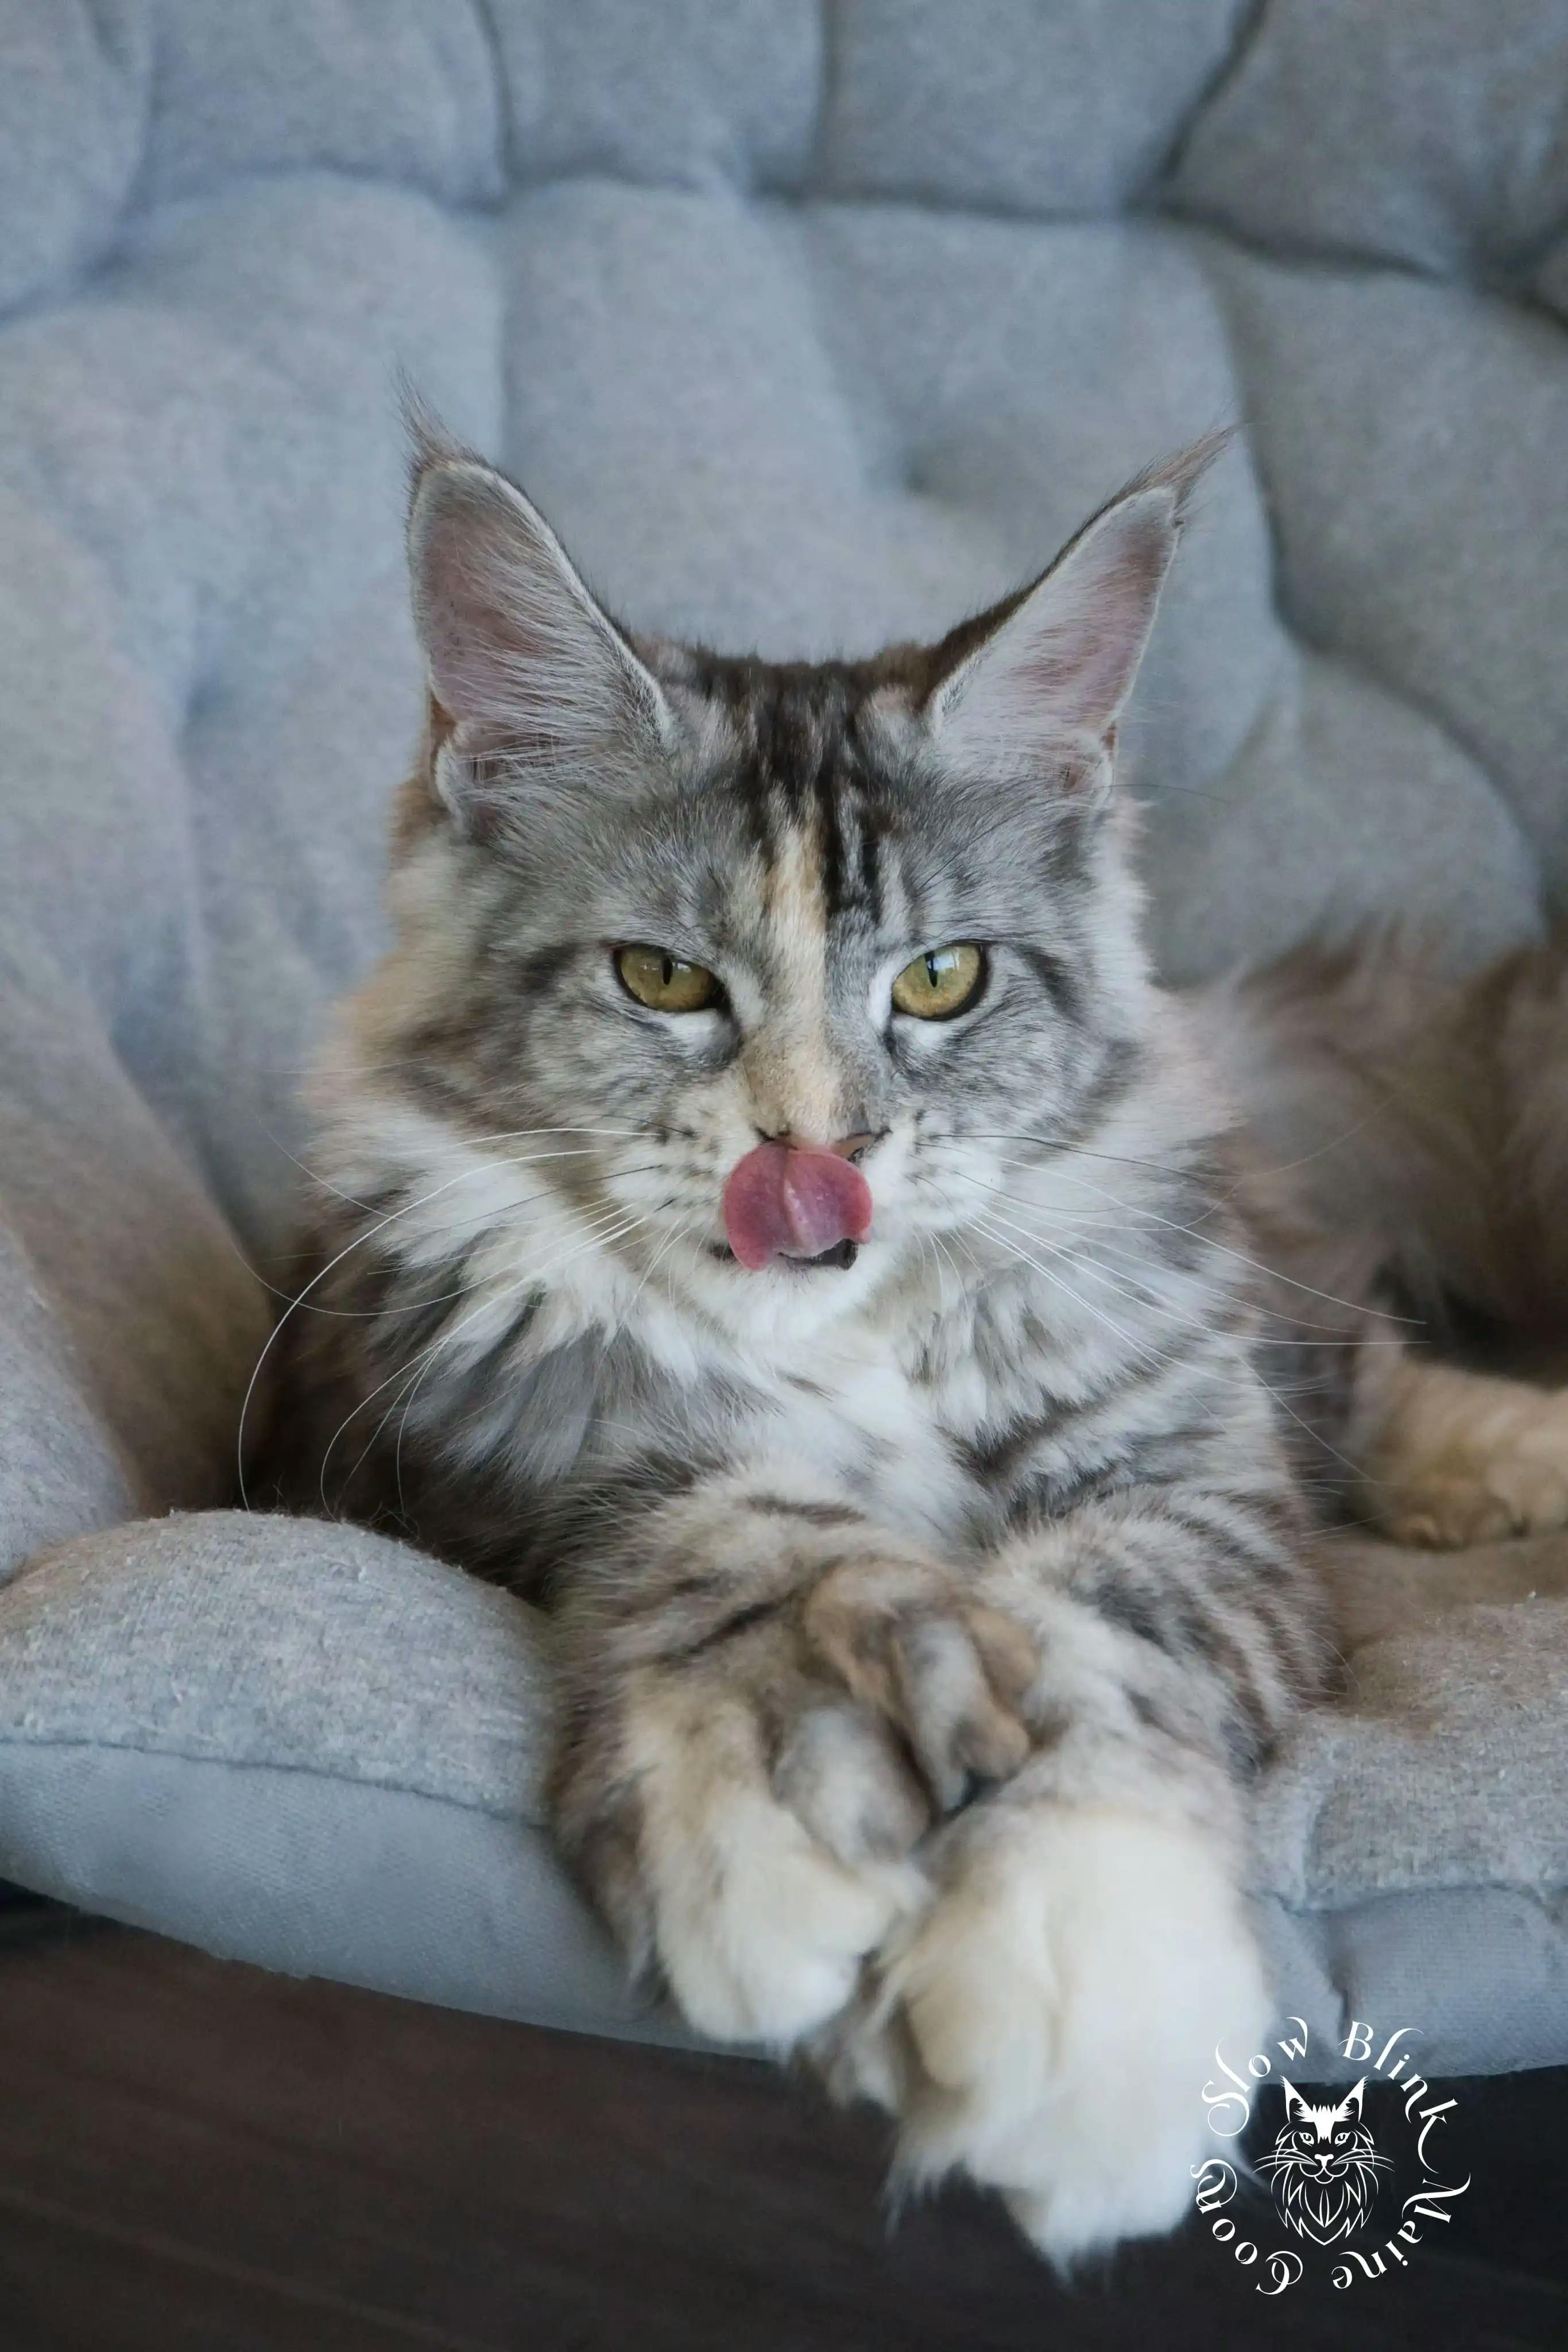 Adult Maine Coon Cat from SlowBlinkMaineCoons > ems code fs 25 | poly paws | split face | maine coon cat | aphrodite | 1 year old | maine coon queen at slowblink maine coons 1